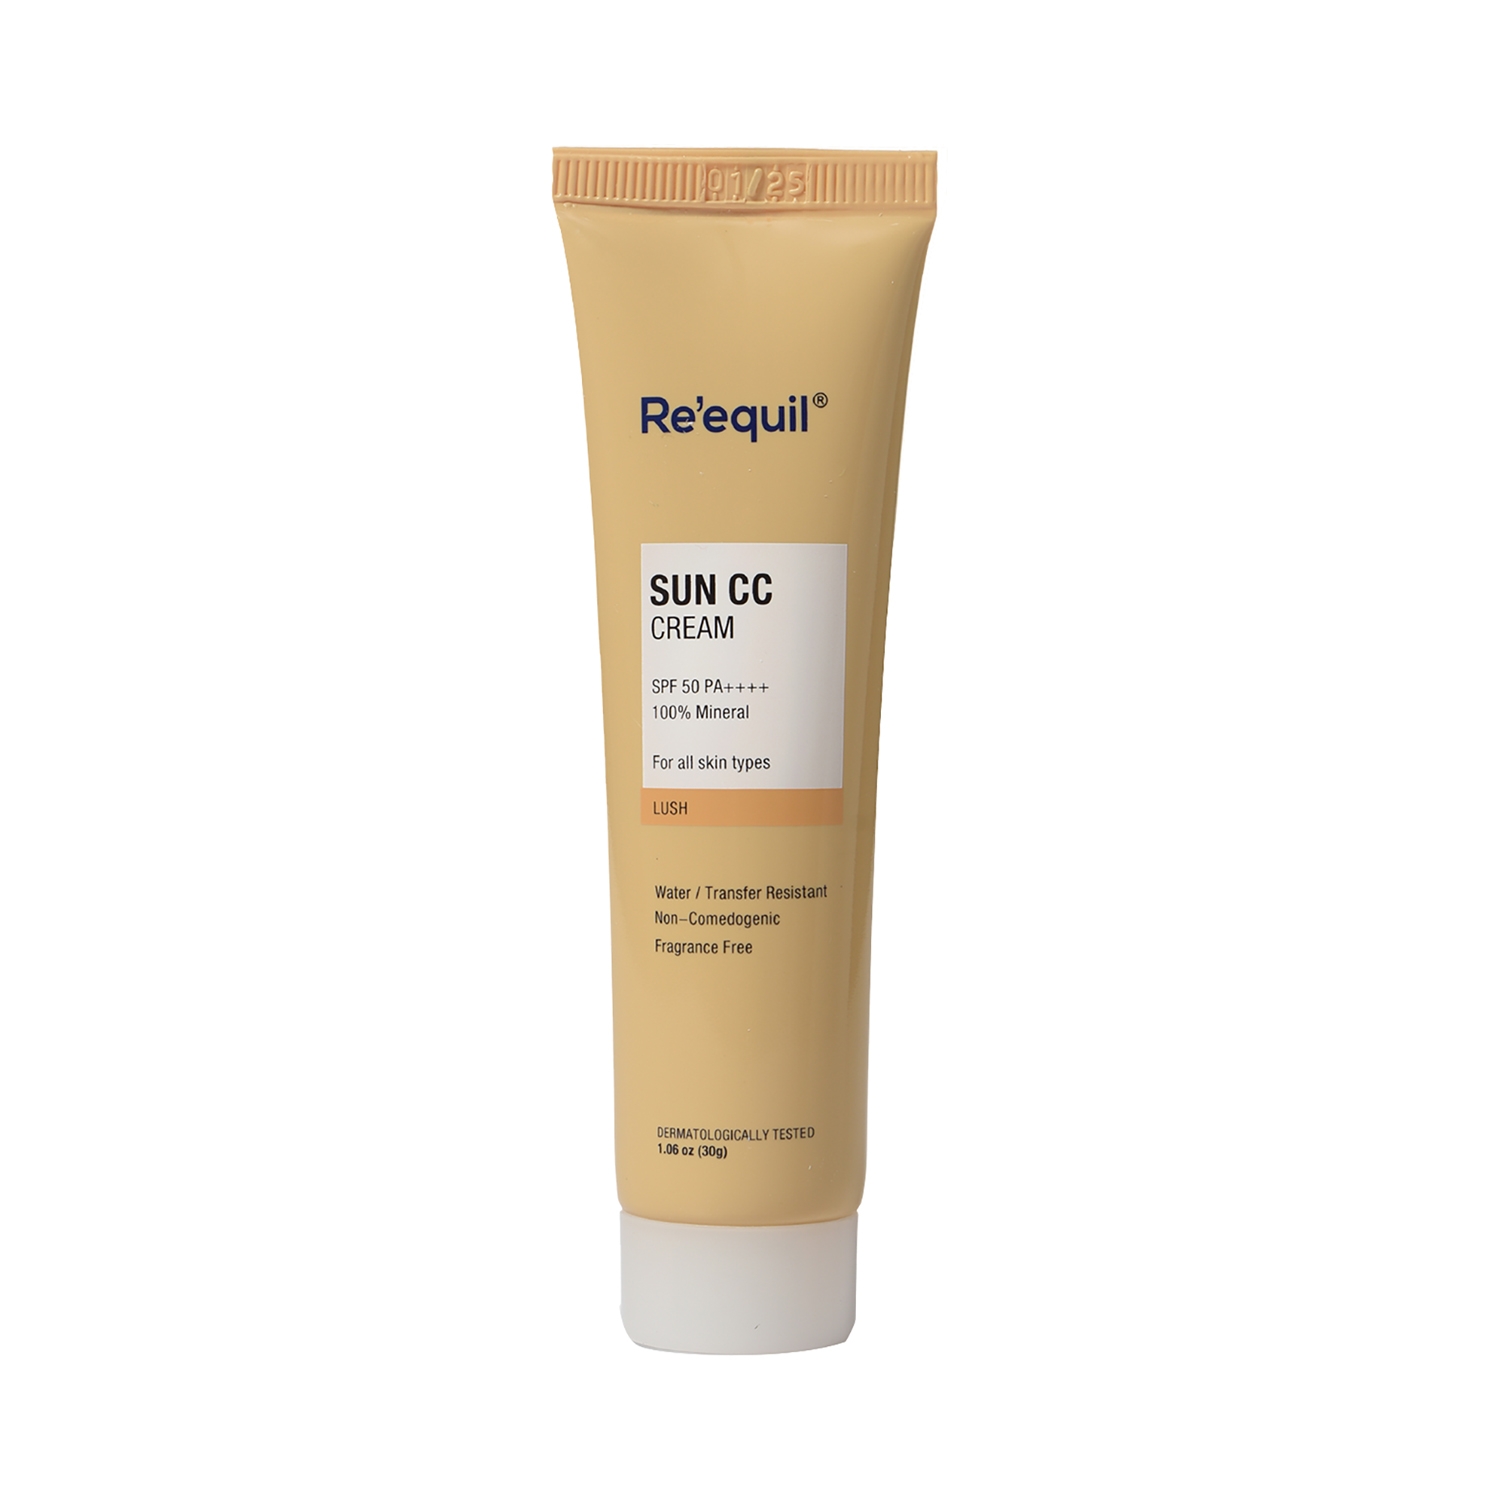 Re'equil | Re'equil Sun CC Cream SPF 50 PA++++ - Lush (30g)